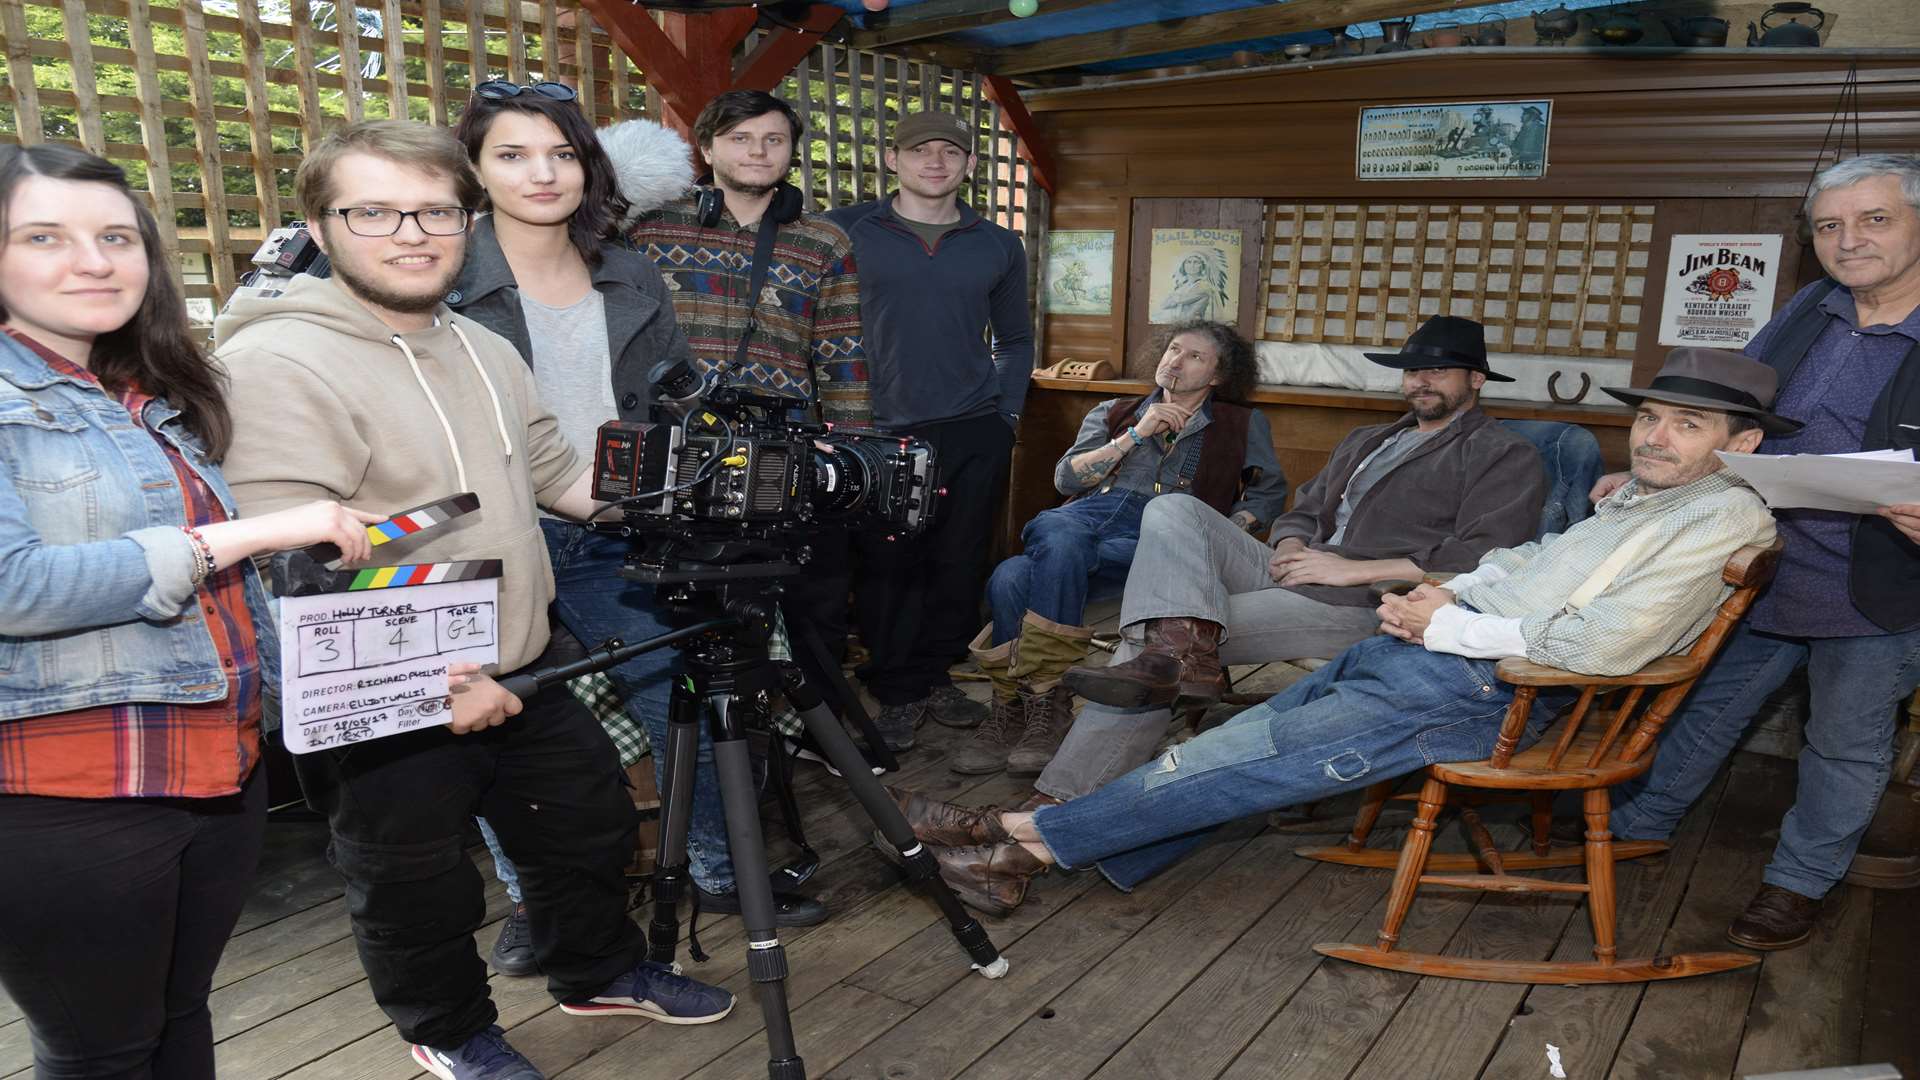 Cast and crew at the Dancing Dog Saloon